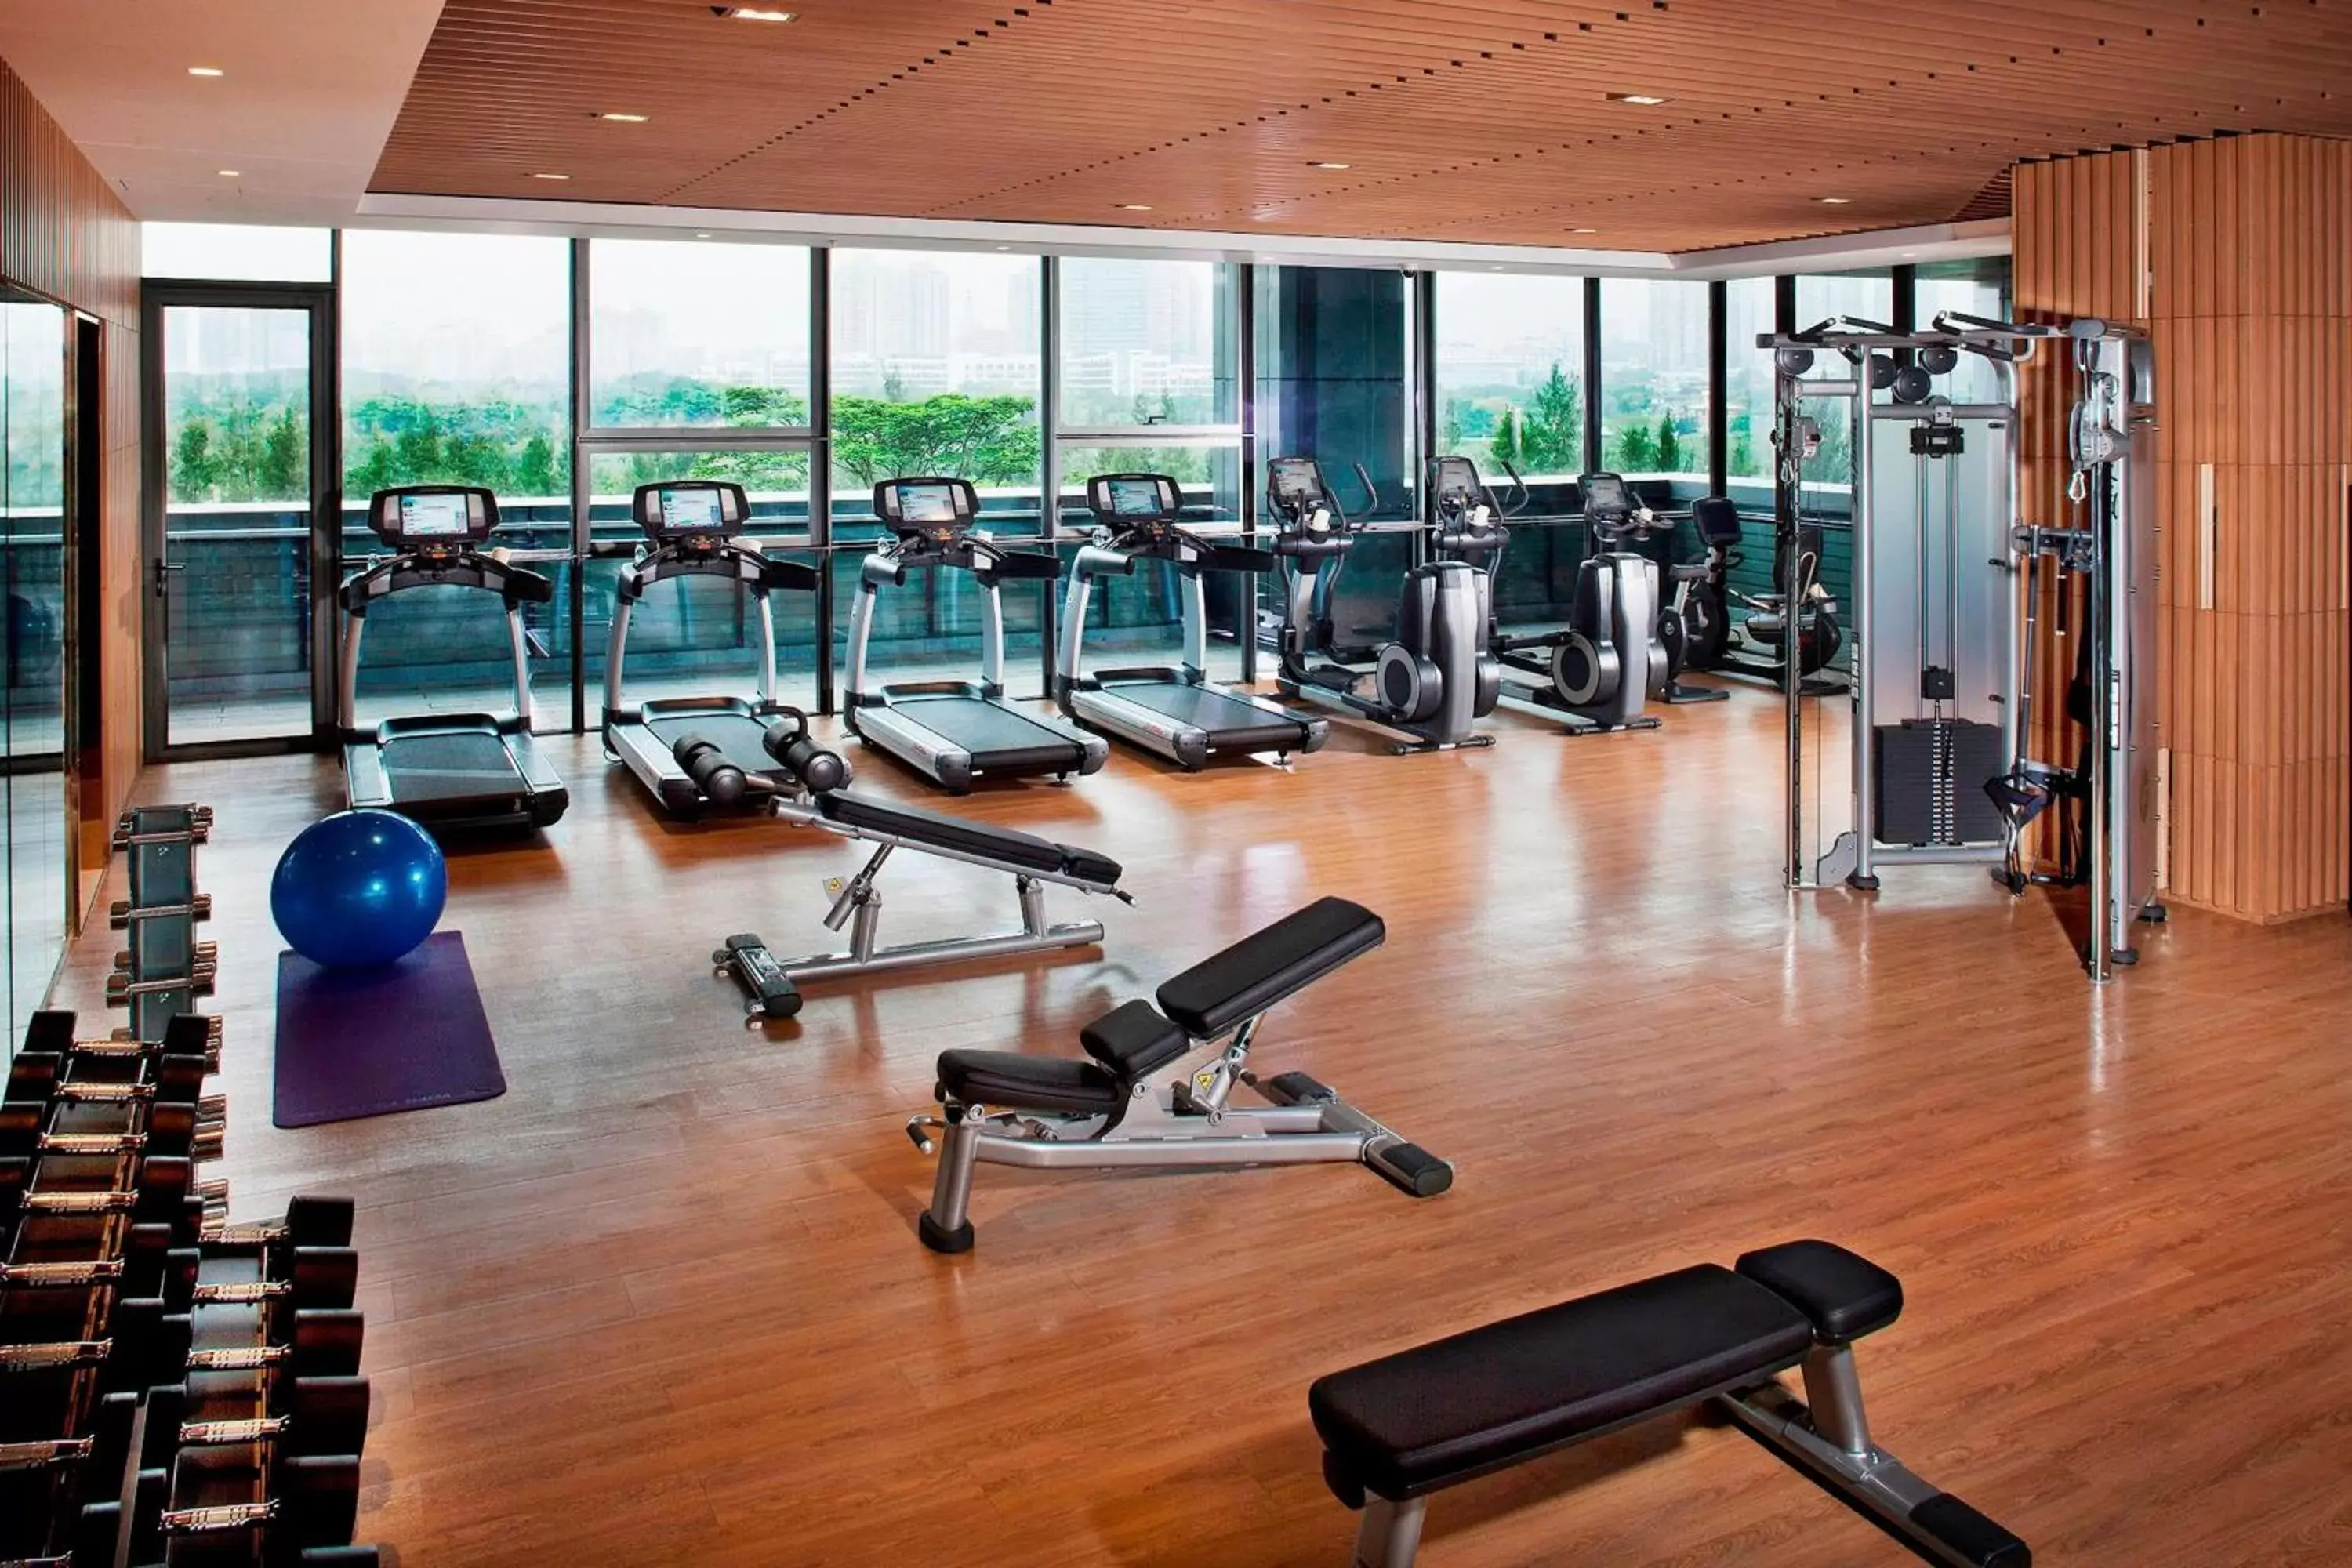 Fitness centre/facilities, Fitness Center/Facilities in The OCT Harbour, Shenzhen - Marriott Executive Apartments